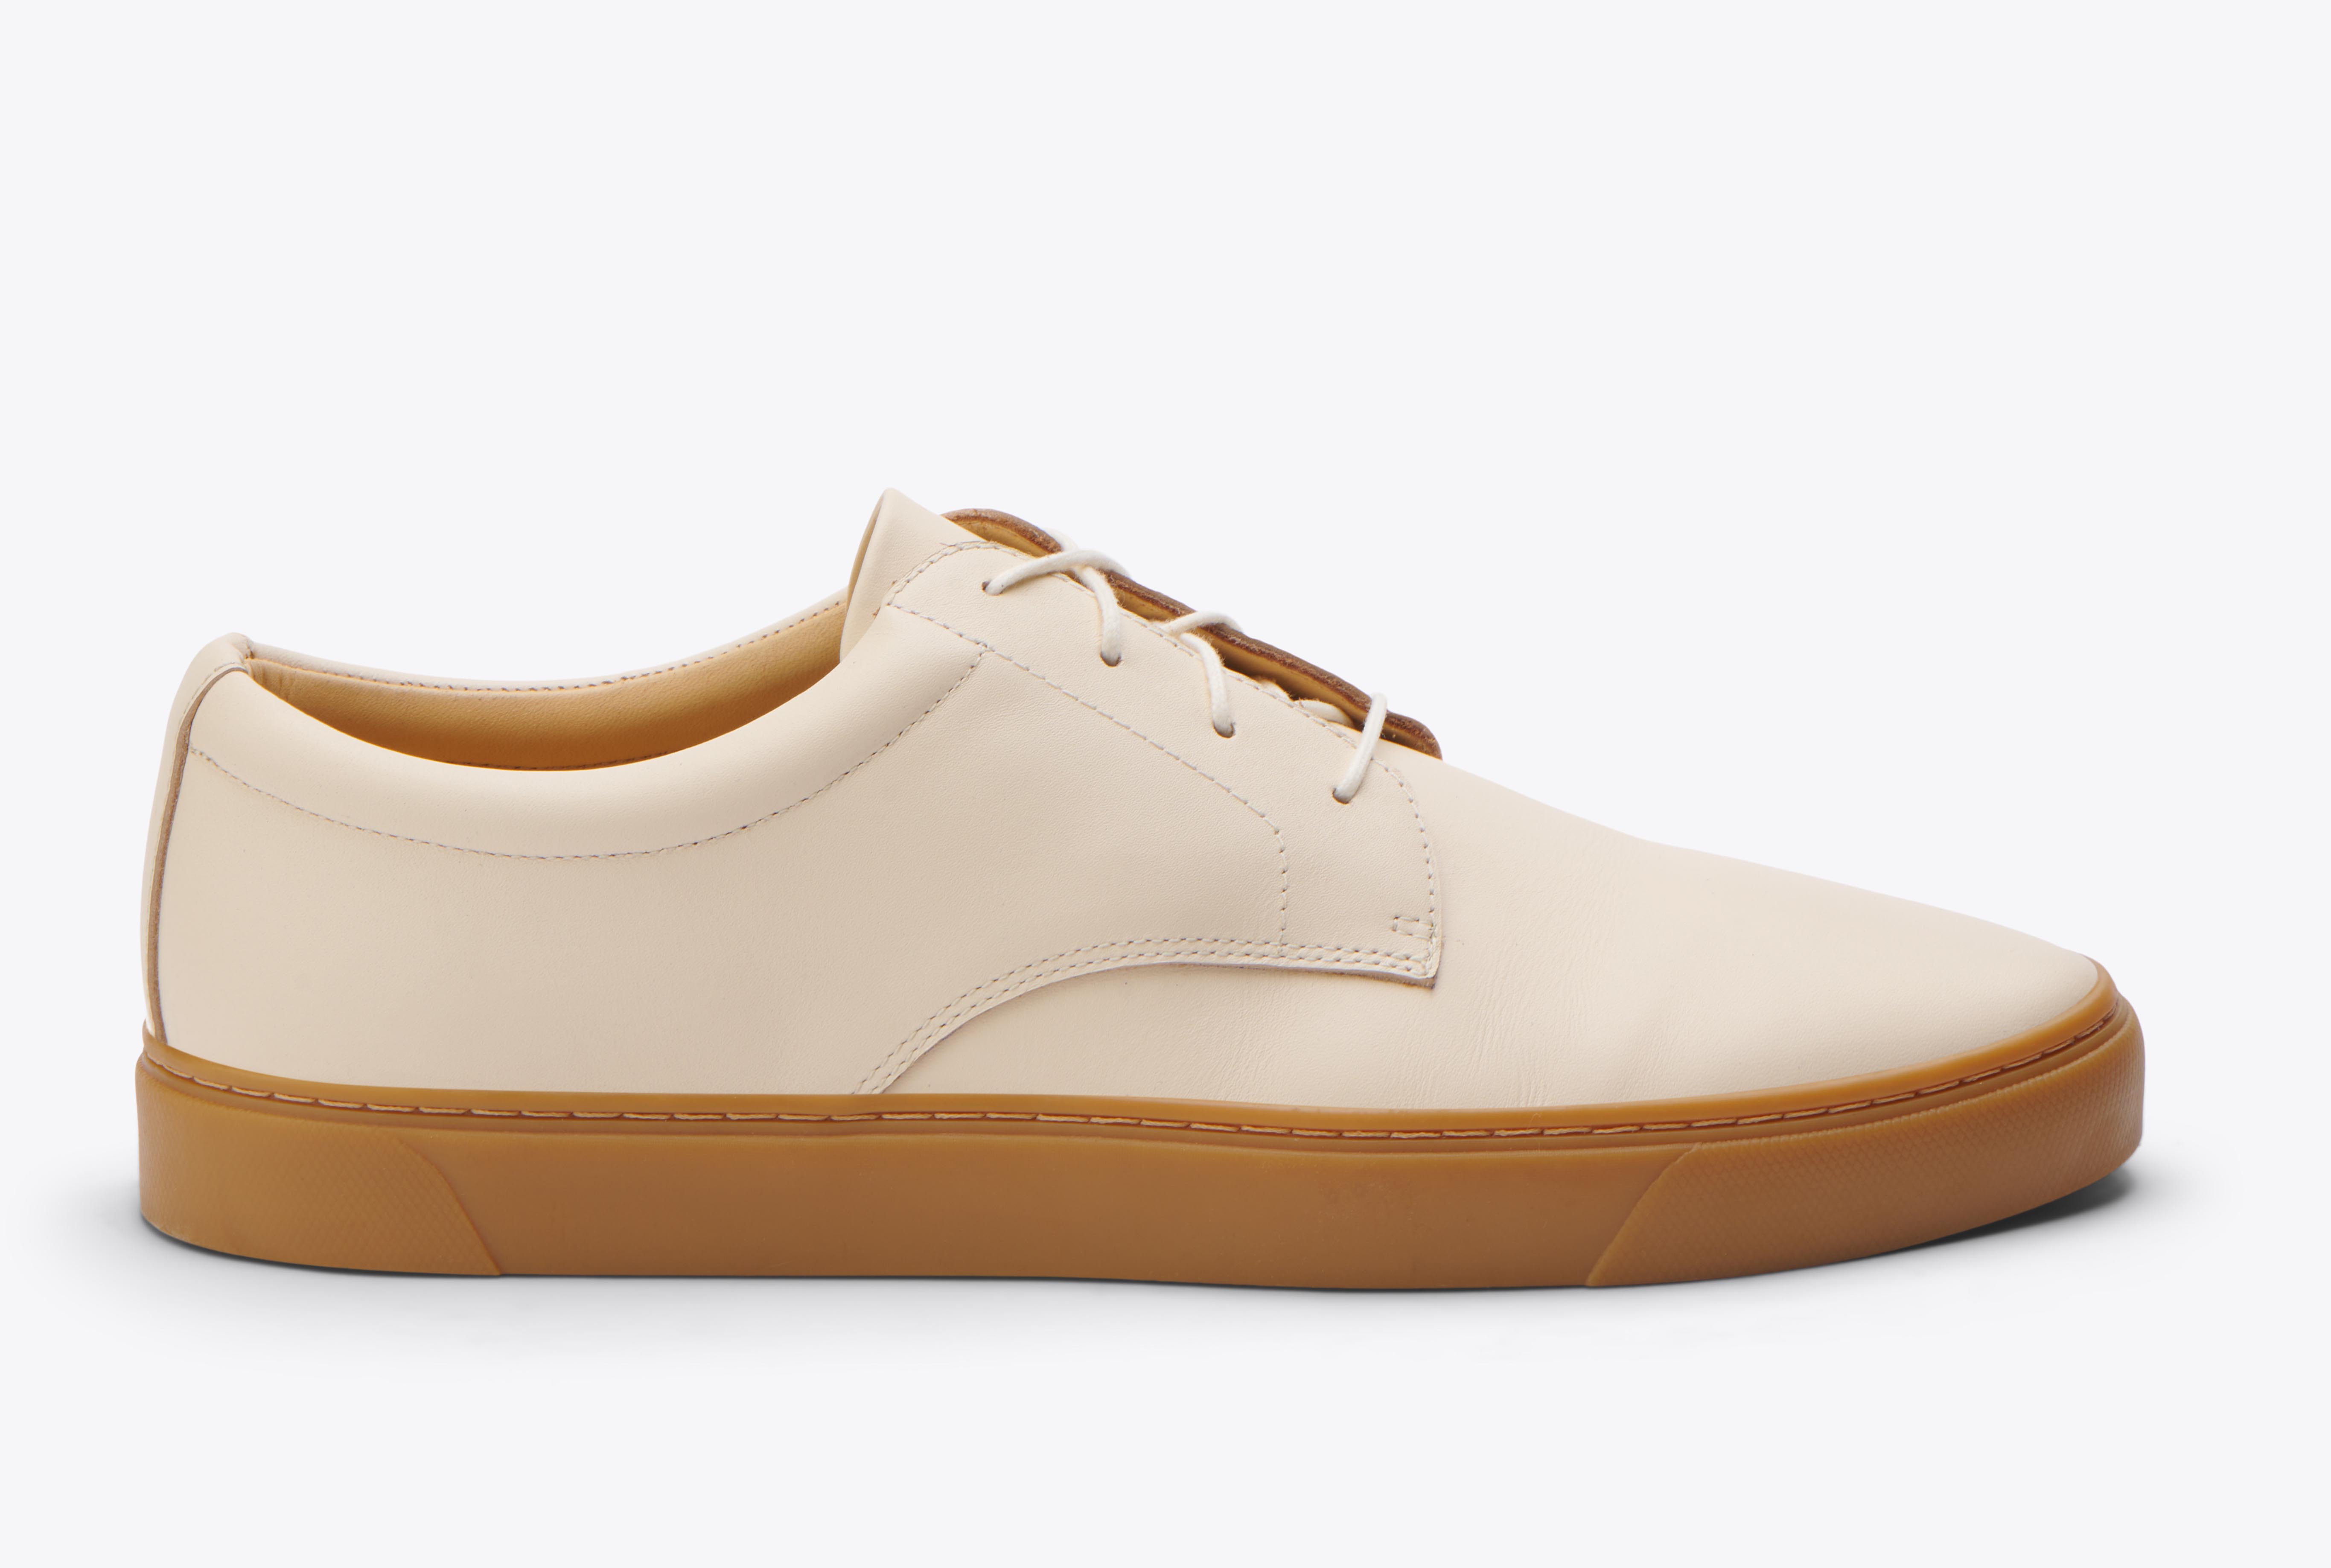 Nisolo Everyday Low Top Sneaker Bone/Gum - Every Nisolo product is built on the foundation of comfort, function, and design. 